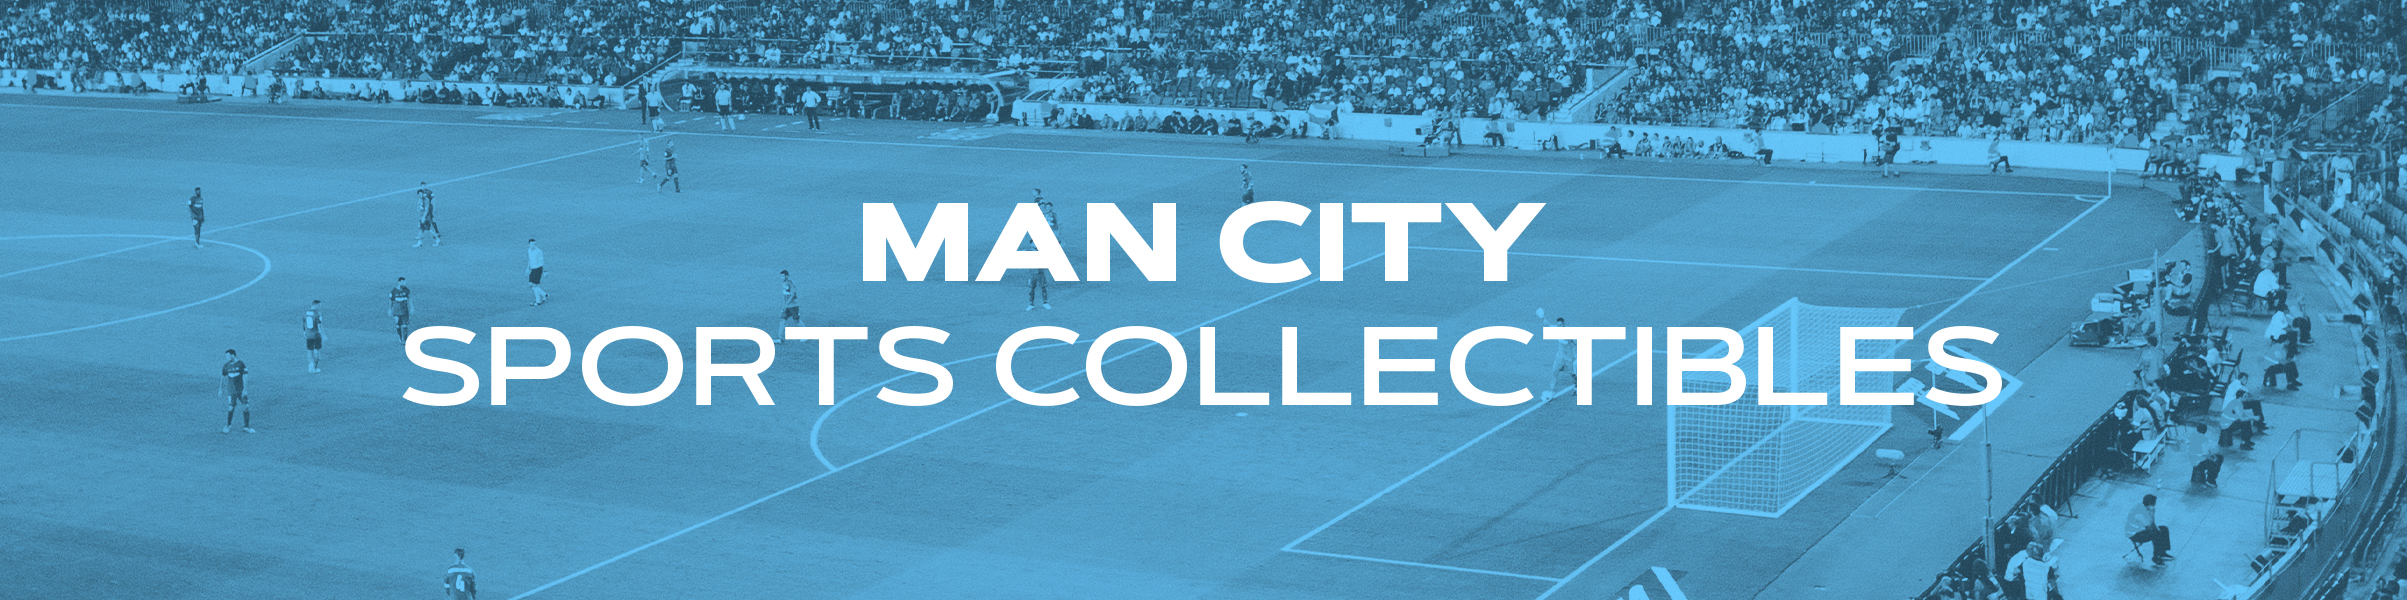 Manchester City Sports Collectibles for the biggest EPL fans